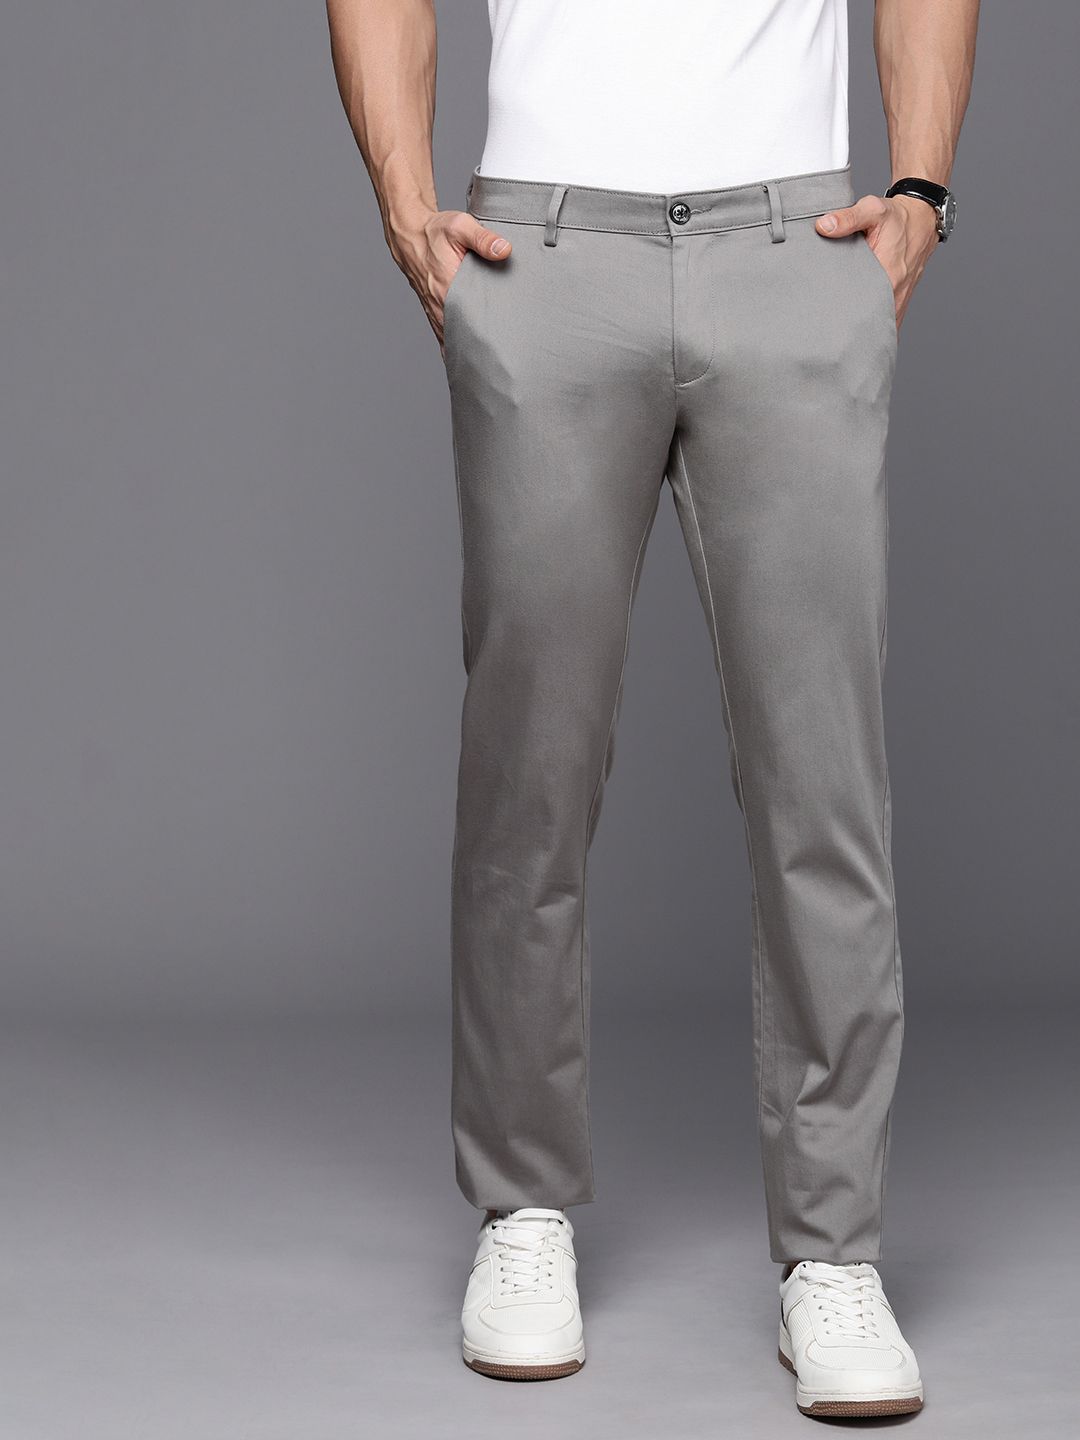 Allen Solly Men Slim Fit Chinos Trousers